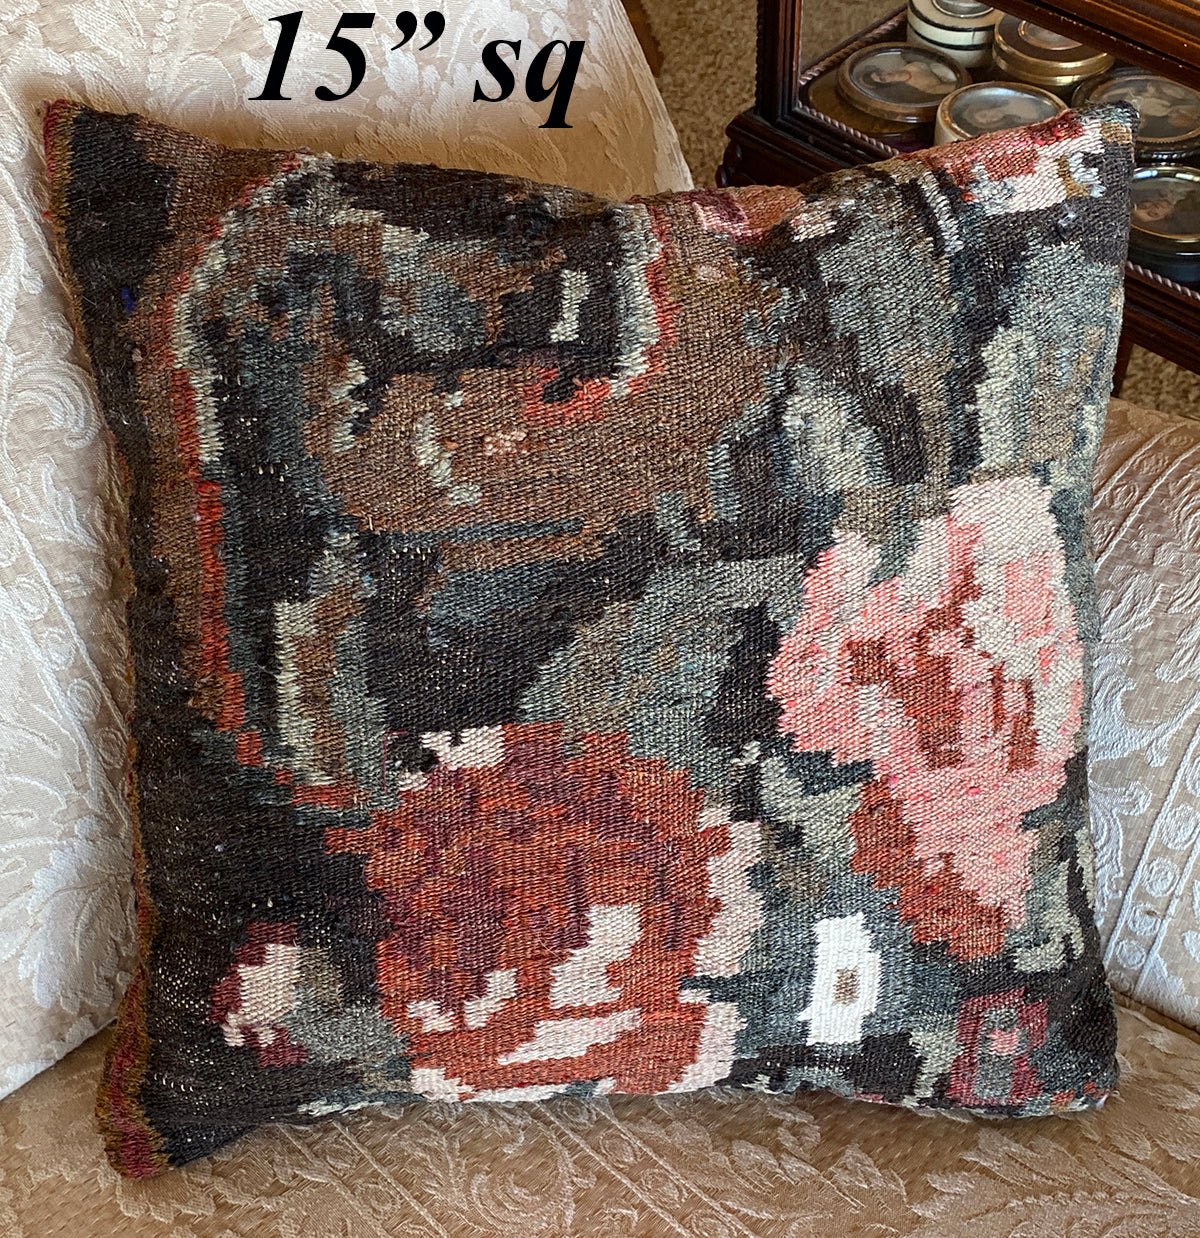 Fine Vintage to Antique Loom Woven Wool Rug or Tapestry Panel is Throw Pillow, 15" Sq.